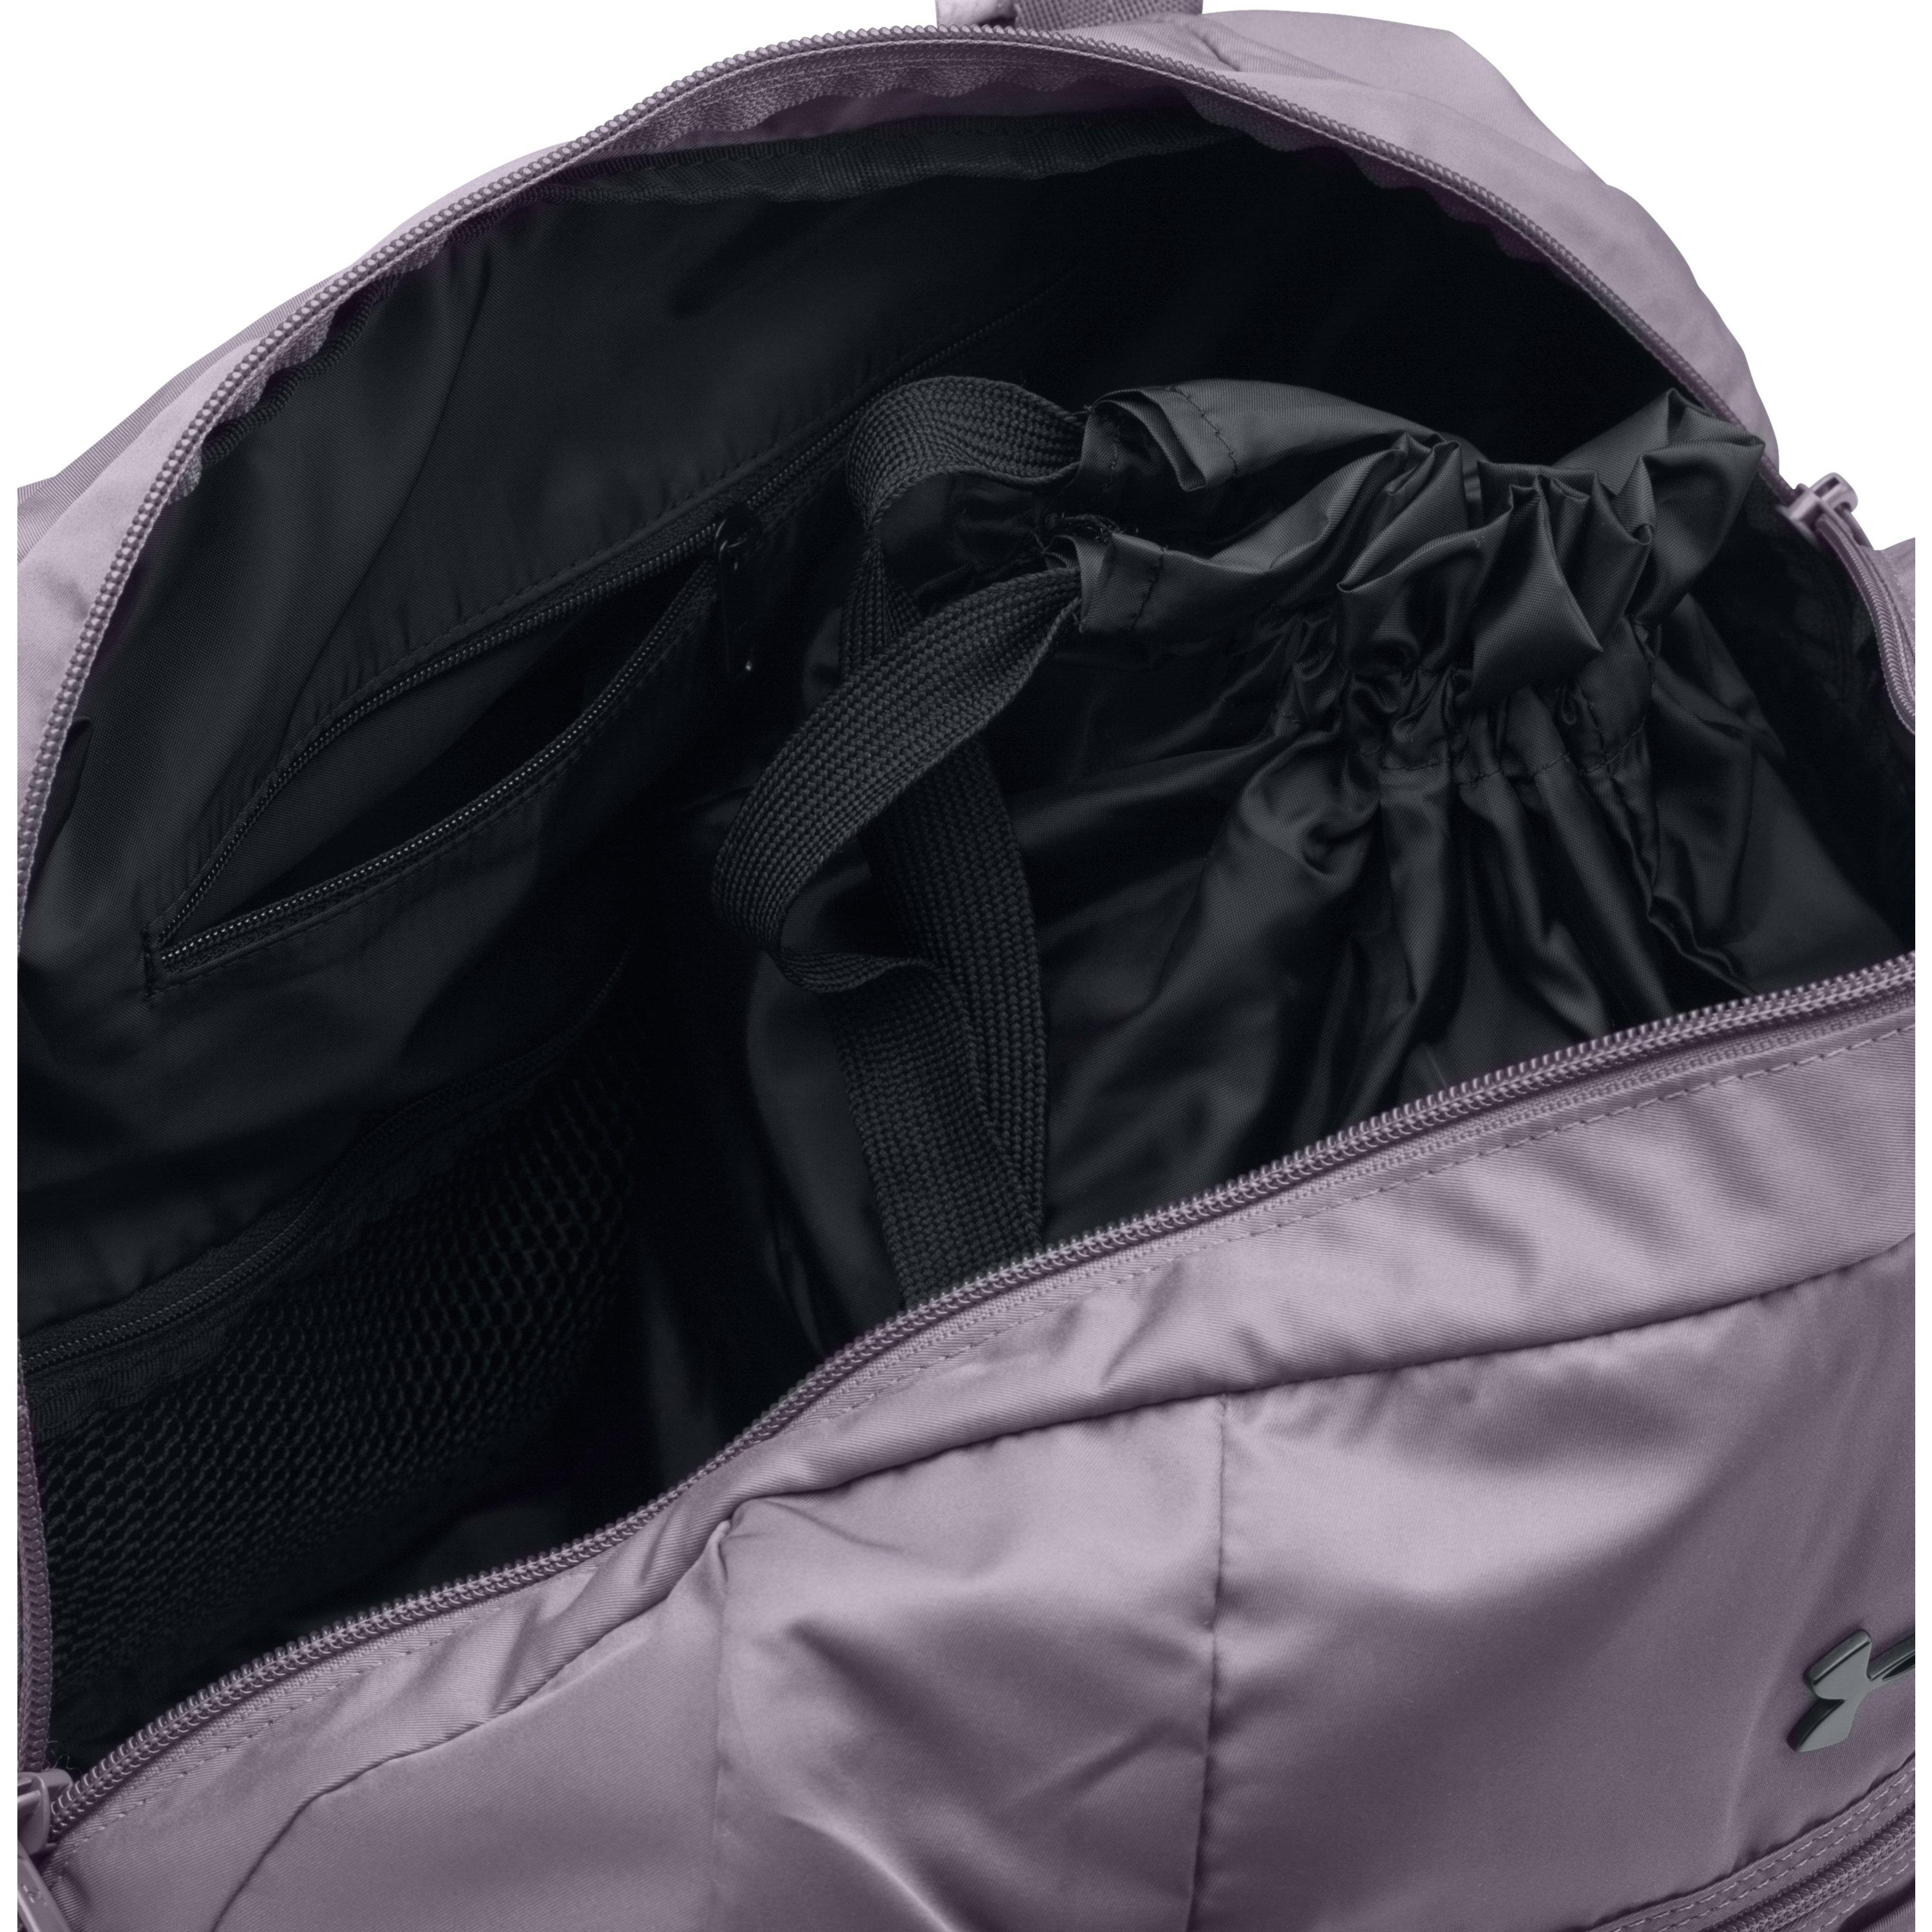 Under Armour Women's Ua The Works Gym Bag in Purple | Lyst